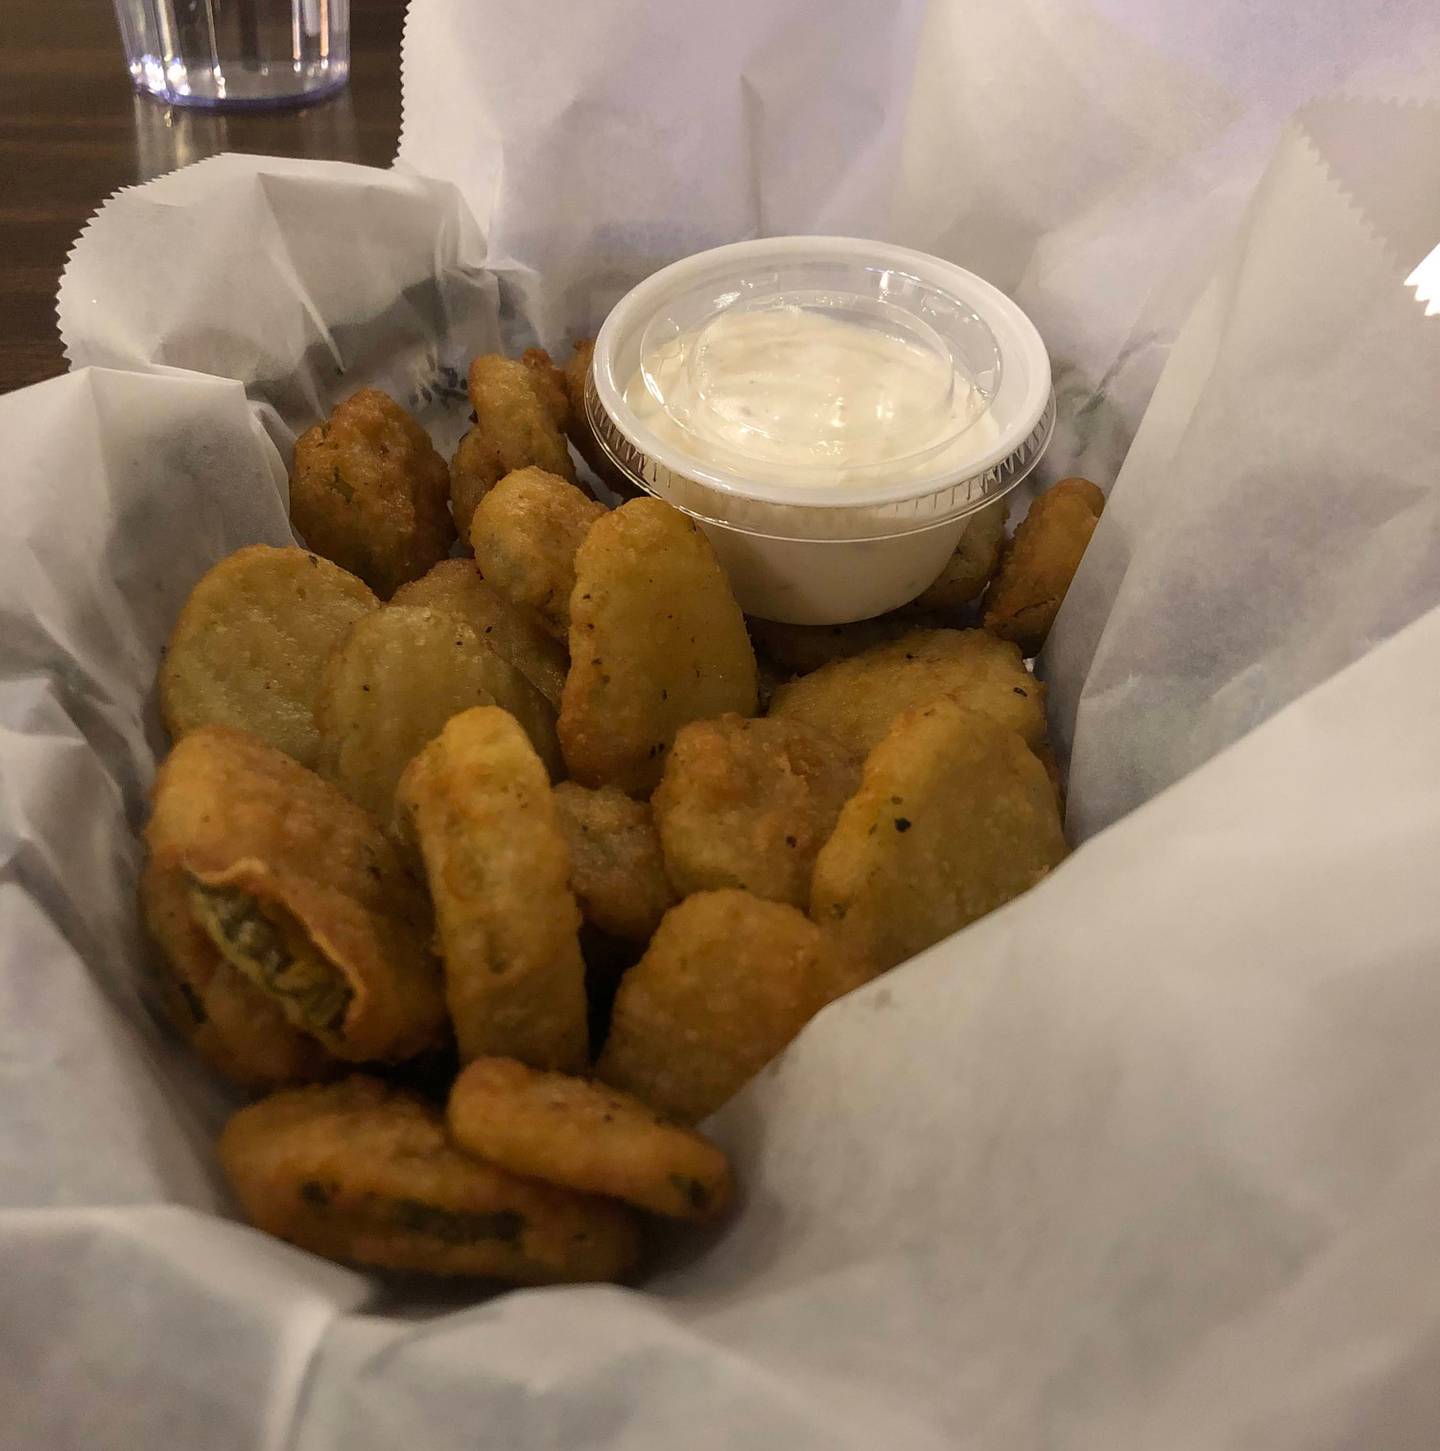 An image of the fried pickles at Joy and Ed's in Utica.